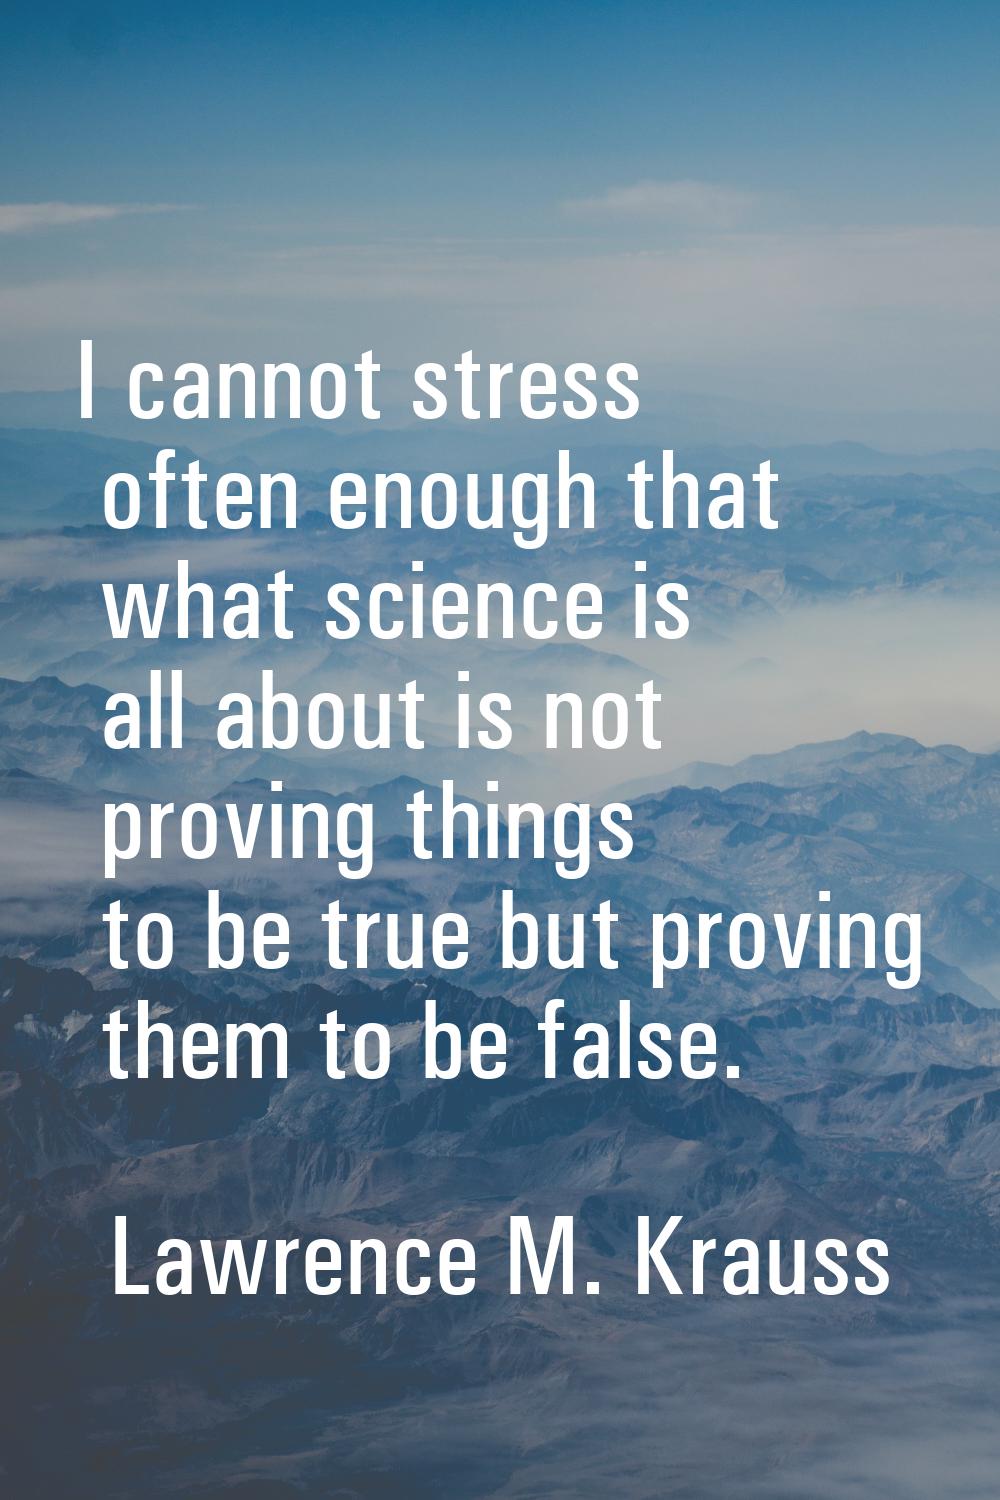 I cannot stress often enough that what science is all about is not proving things to be true but pr